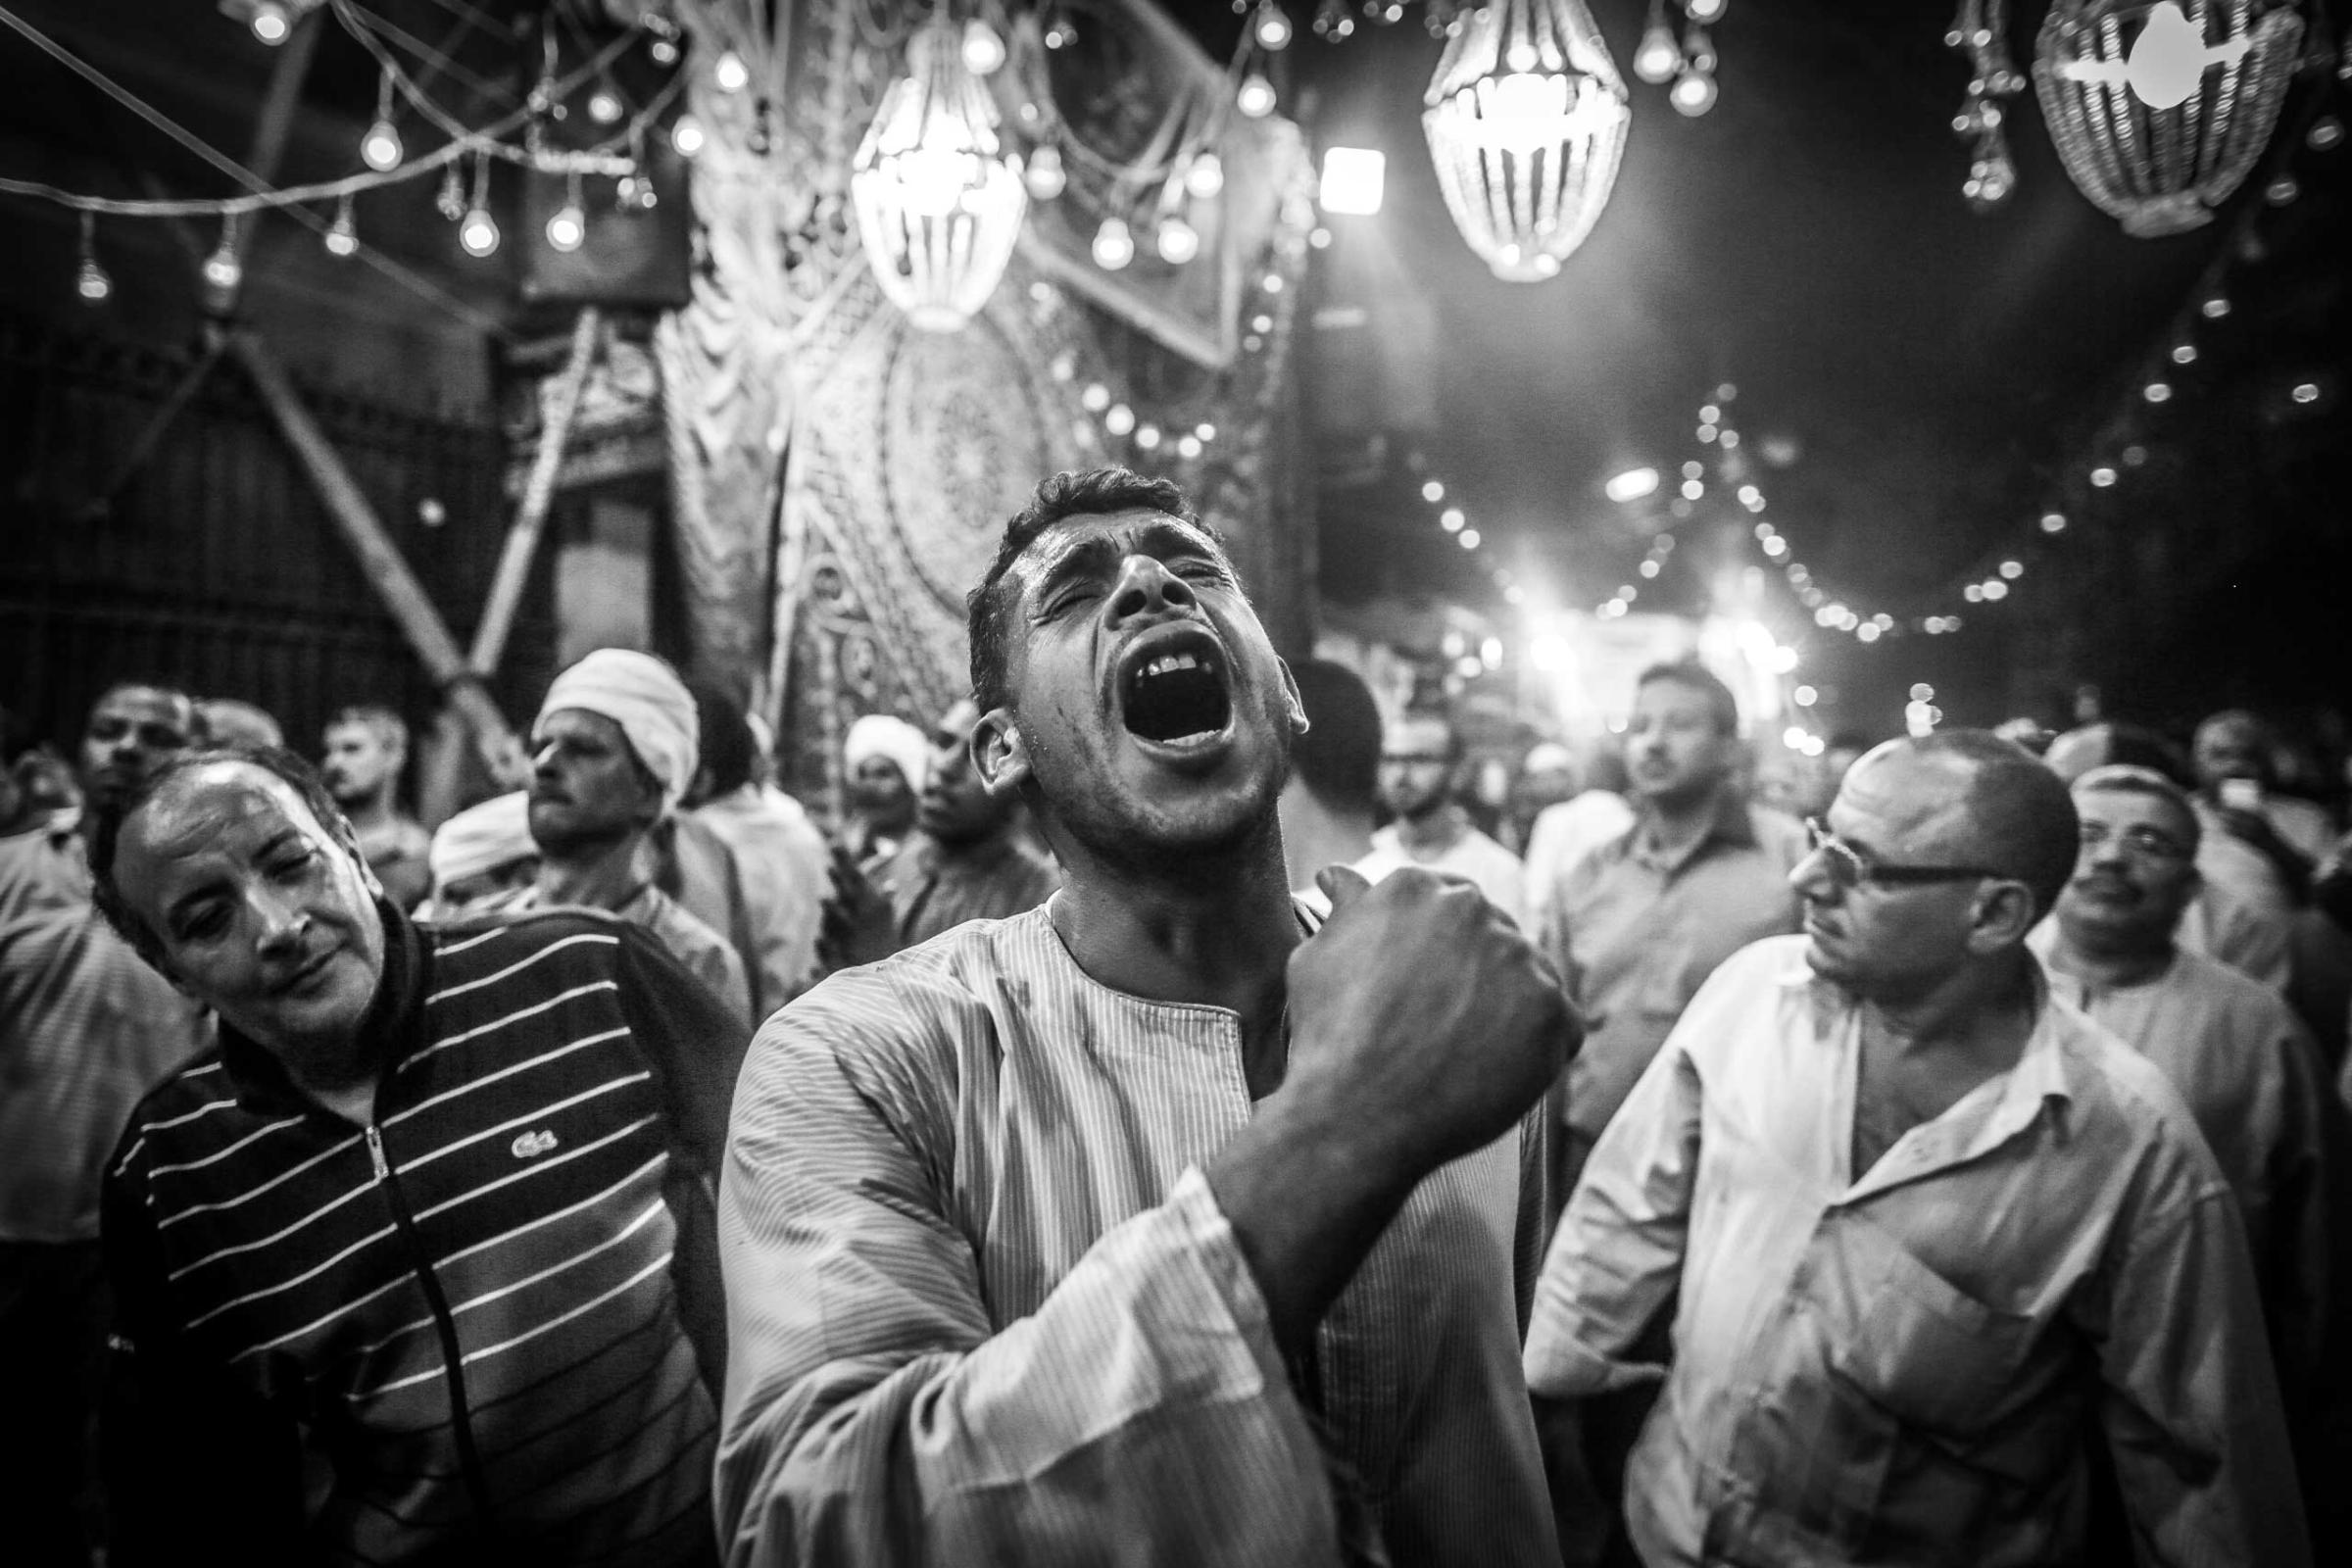 TIME LightBox: Exploring the Mawlids of EgyptWorshippers at a celebration at the Sayeda Zeinab mosque take part in a performance called Hadra, in which they whirl for long periods. Downtown Cairo, Egypt, May 20, 2014.